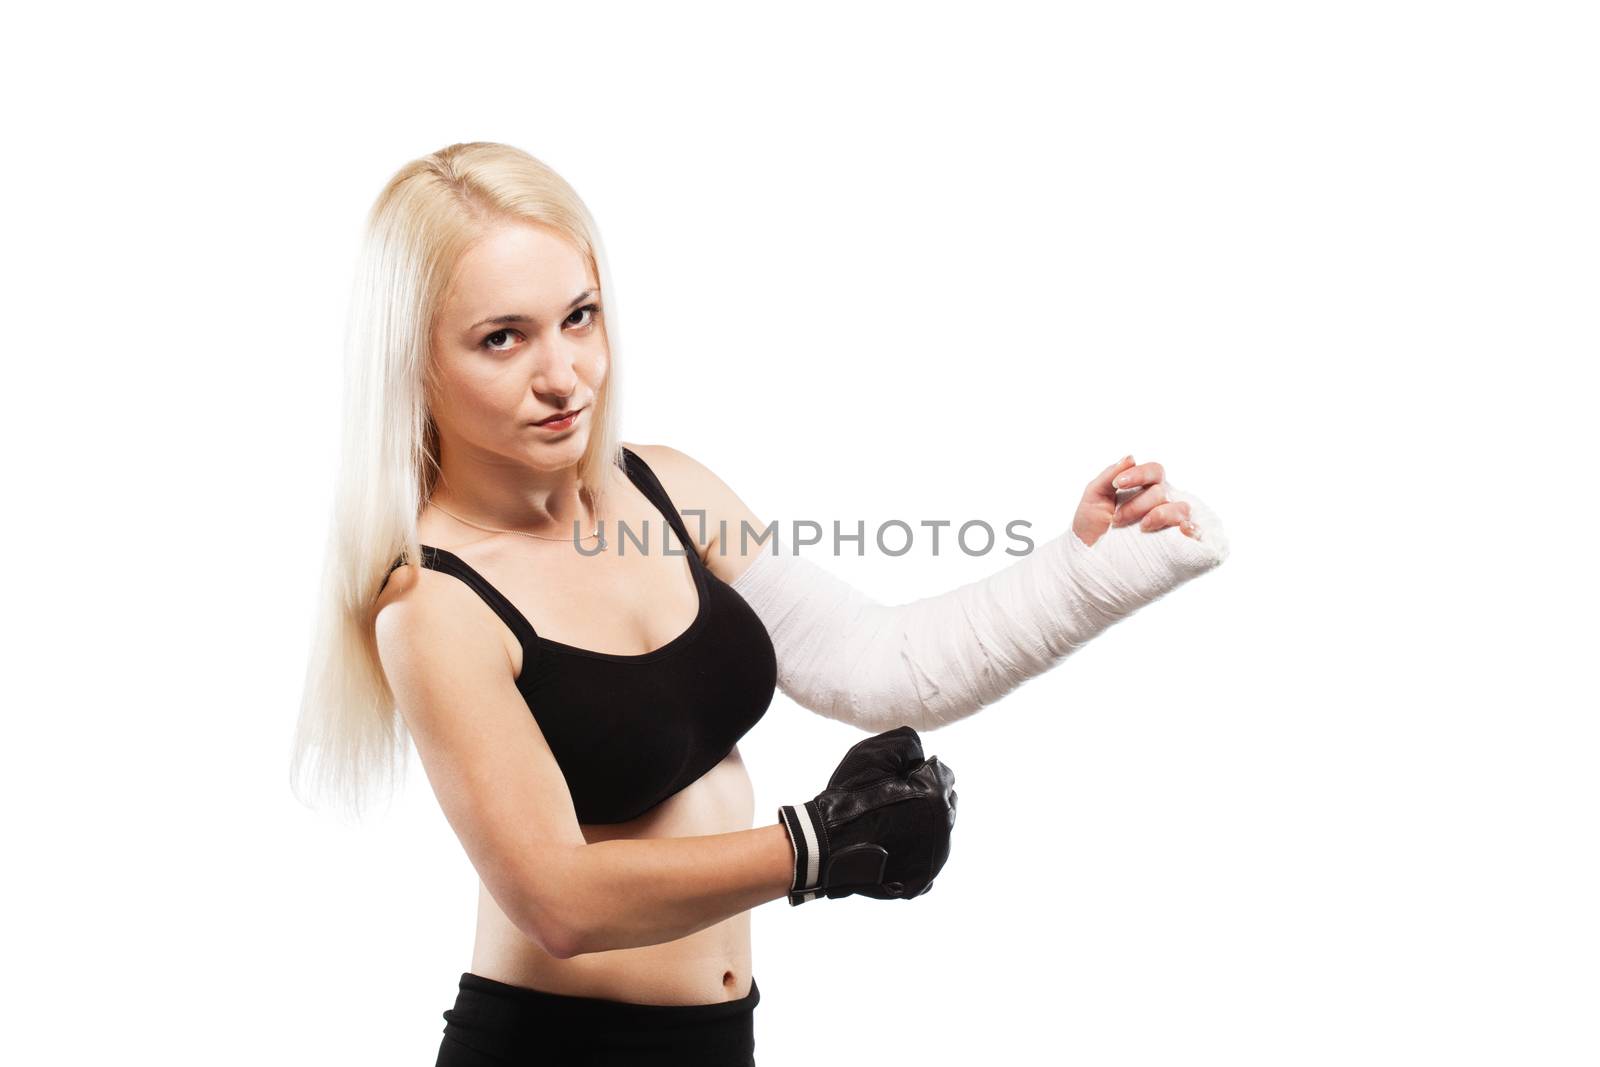 Fitness blond girl with a broken arm in plaster, boxing pose